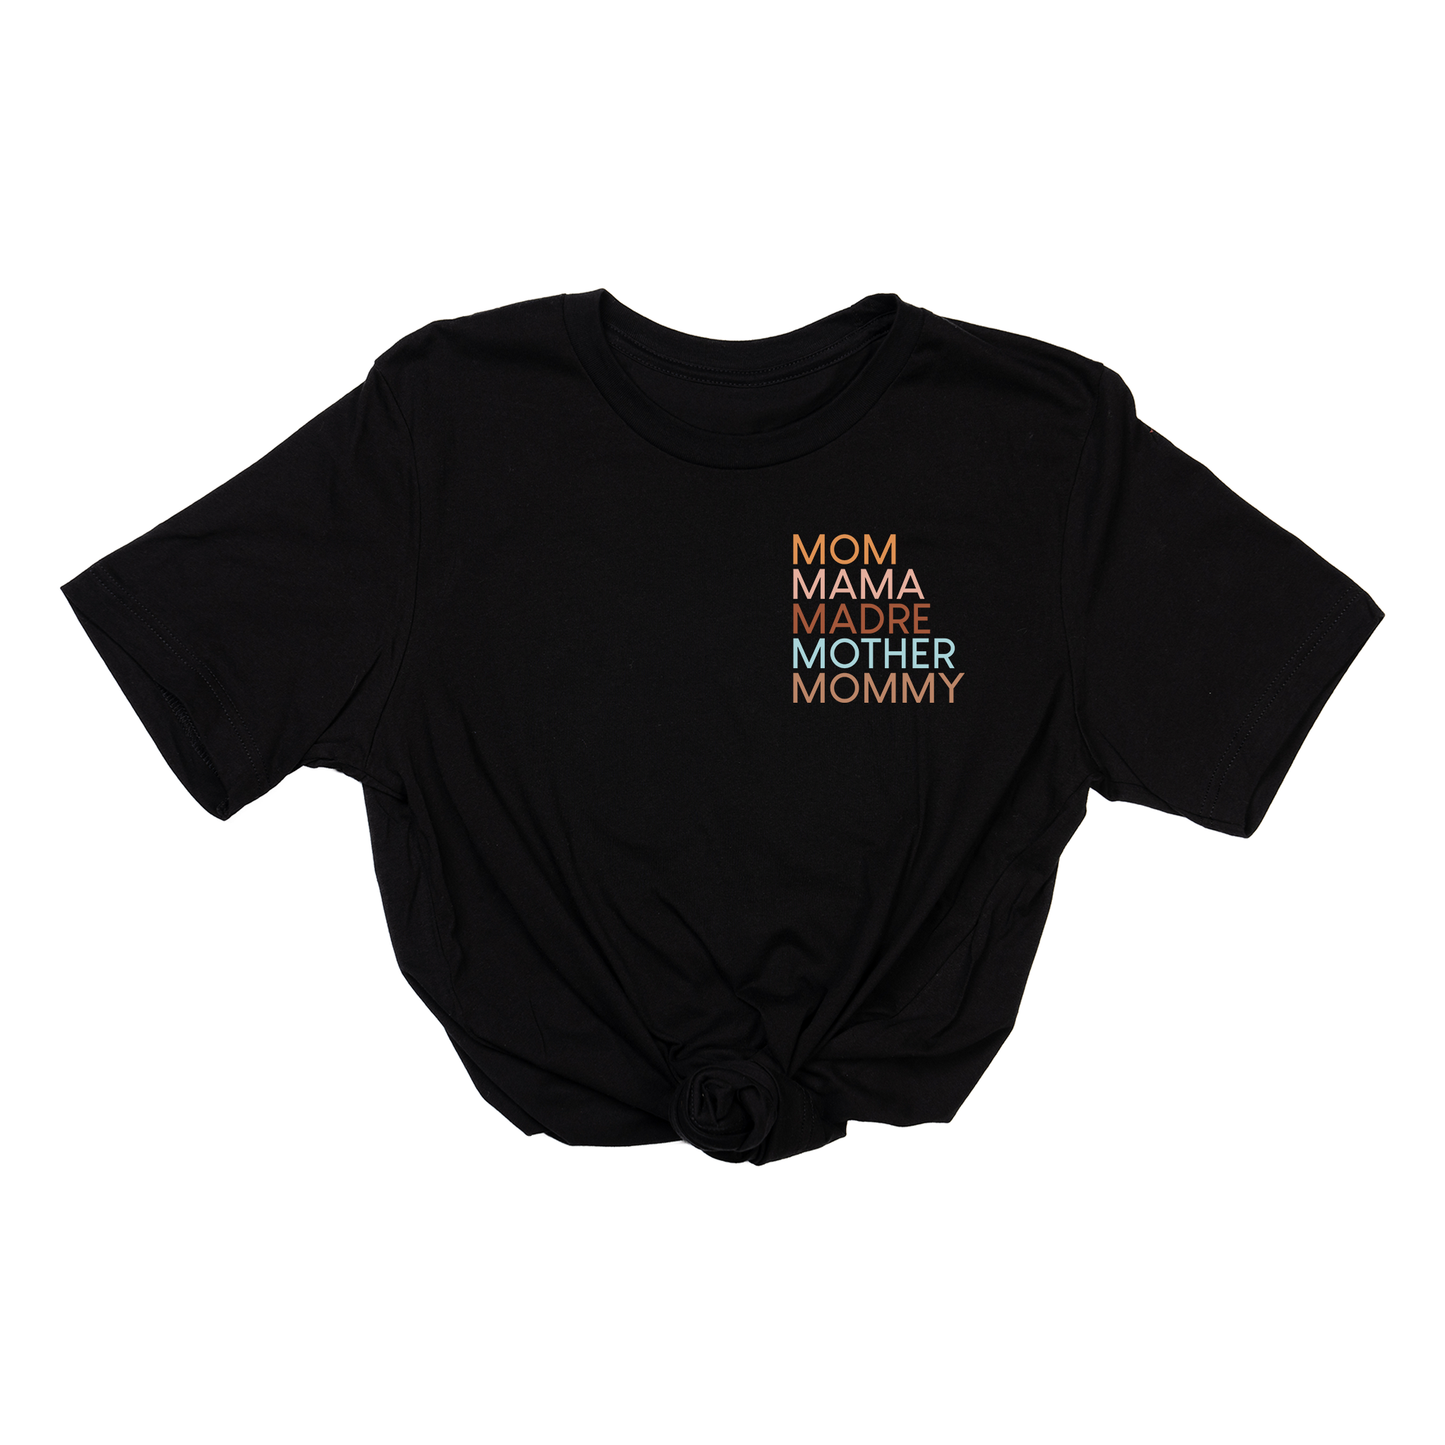 Mom Mama Madre Mother Mommy (Pocket) - Tee (Black)